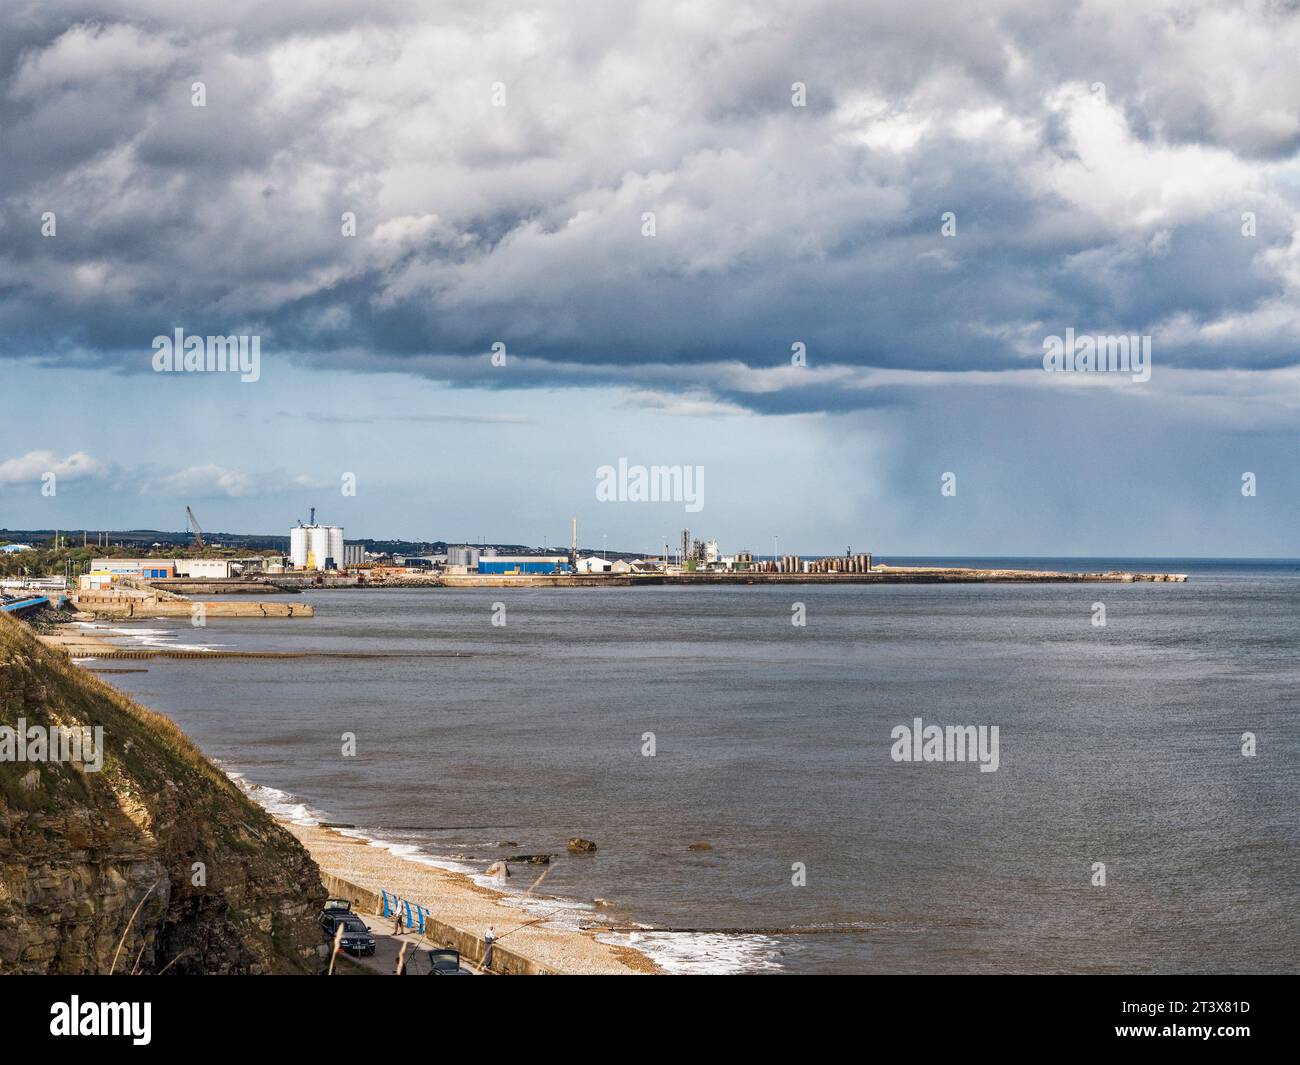 Beaches and cliffs at Sunderland, UK with view to Sunderland docks. Stock Photo